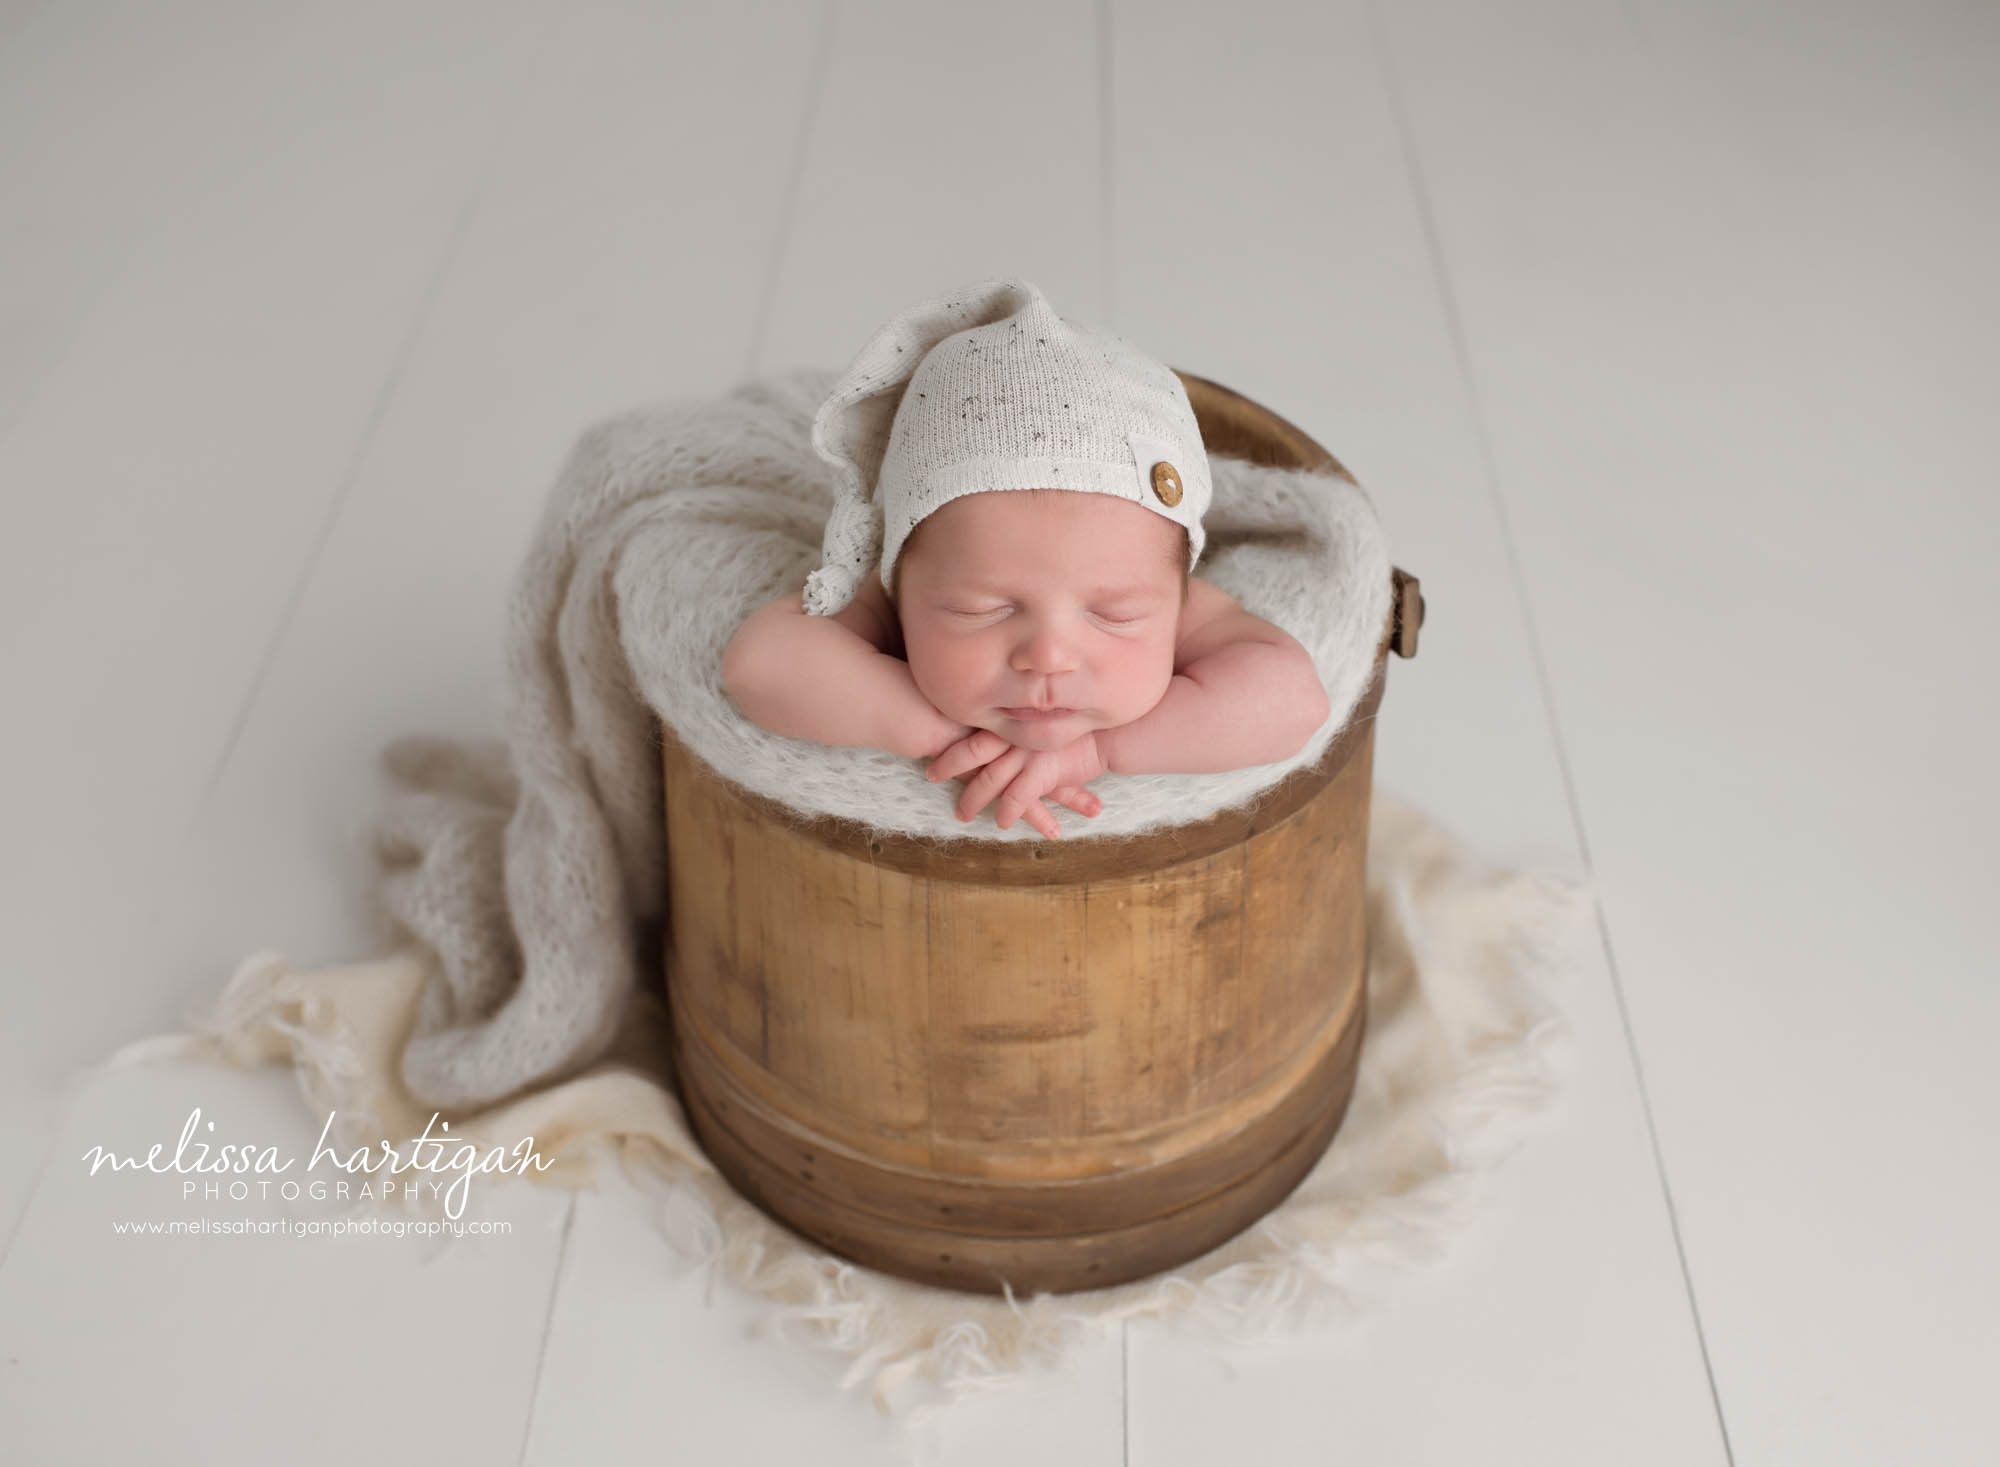 newborn baby boy posed in wooden barrel bucket with light gray knitted wrap and cream colored sleep cap bonnet MA newborn photography CT